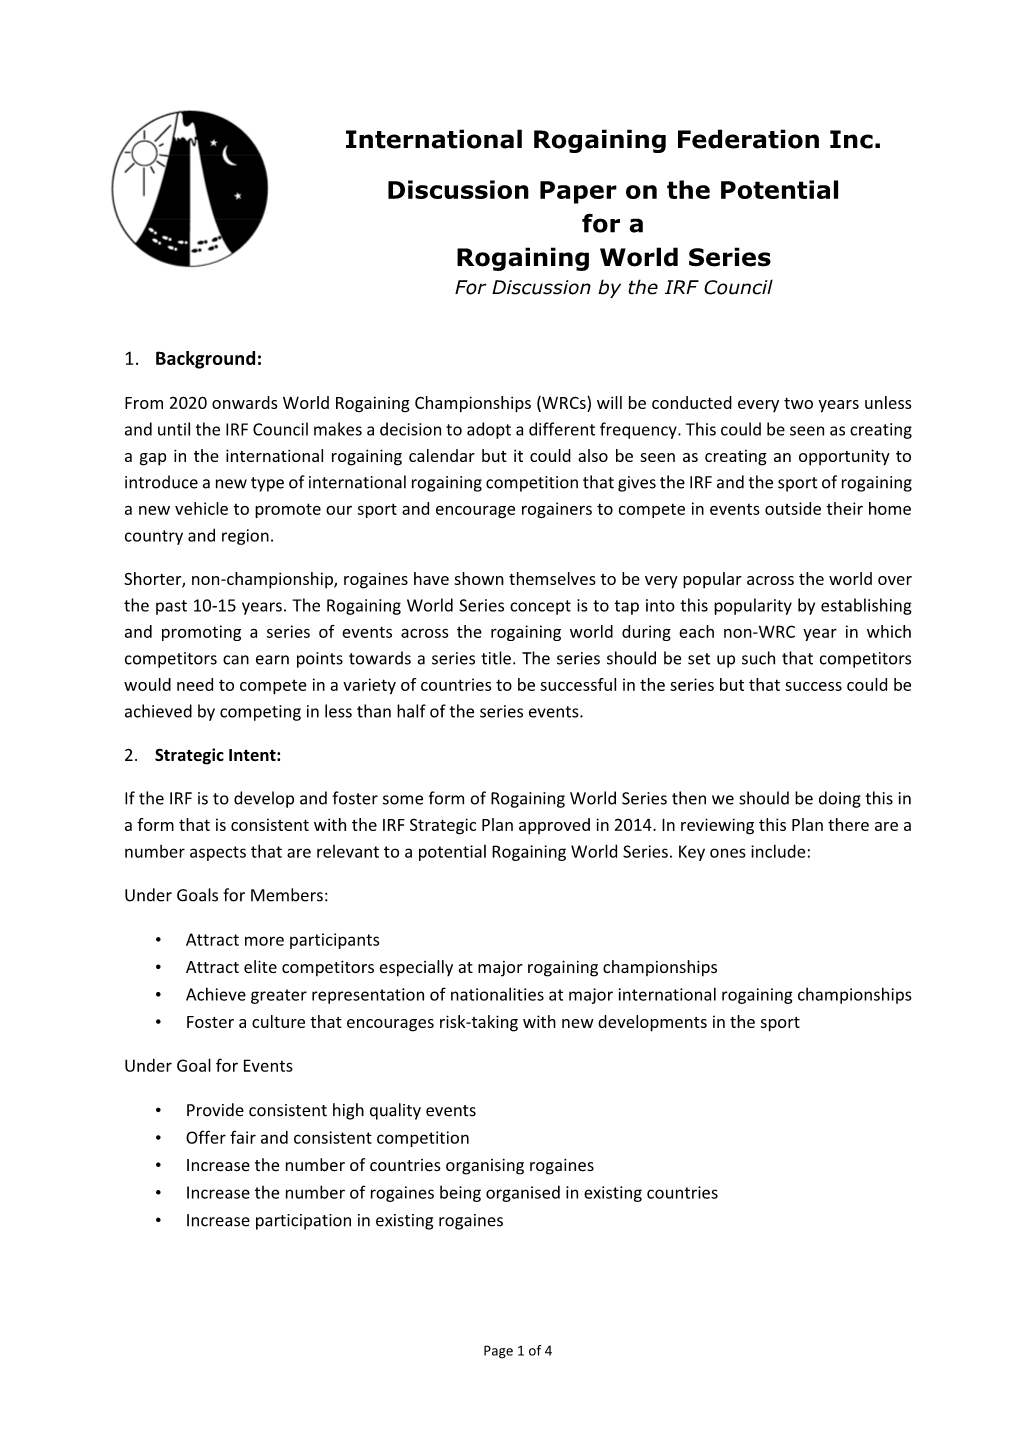 International Rogaining Federation Inc. Discussion Paper on the Potential